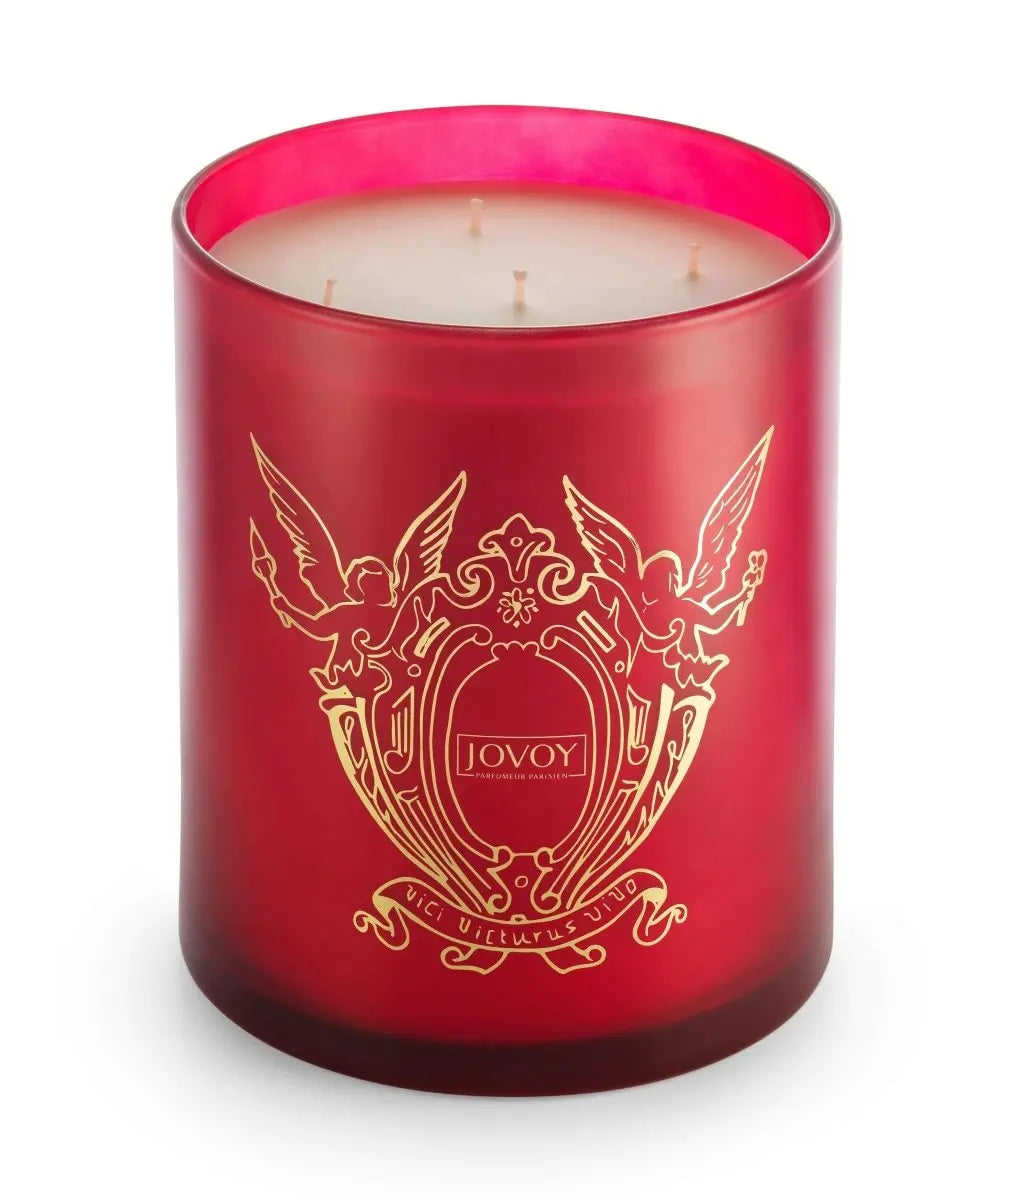 Jovoy Candles 185 gr. - Ambre 1er \/ With glass bell